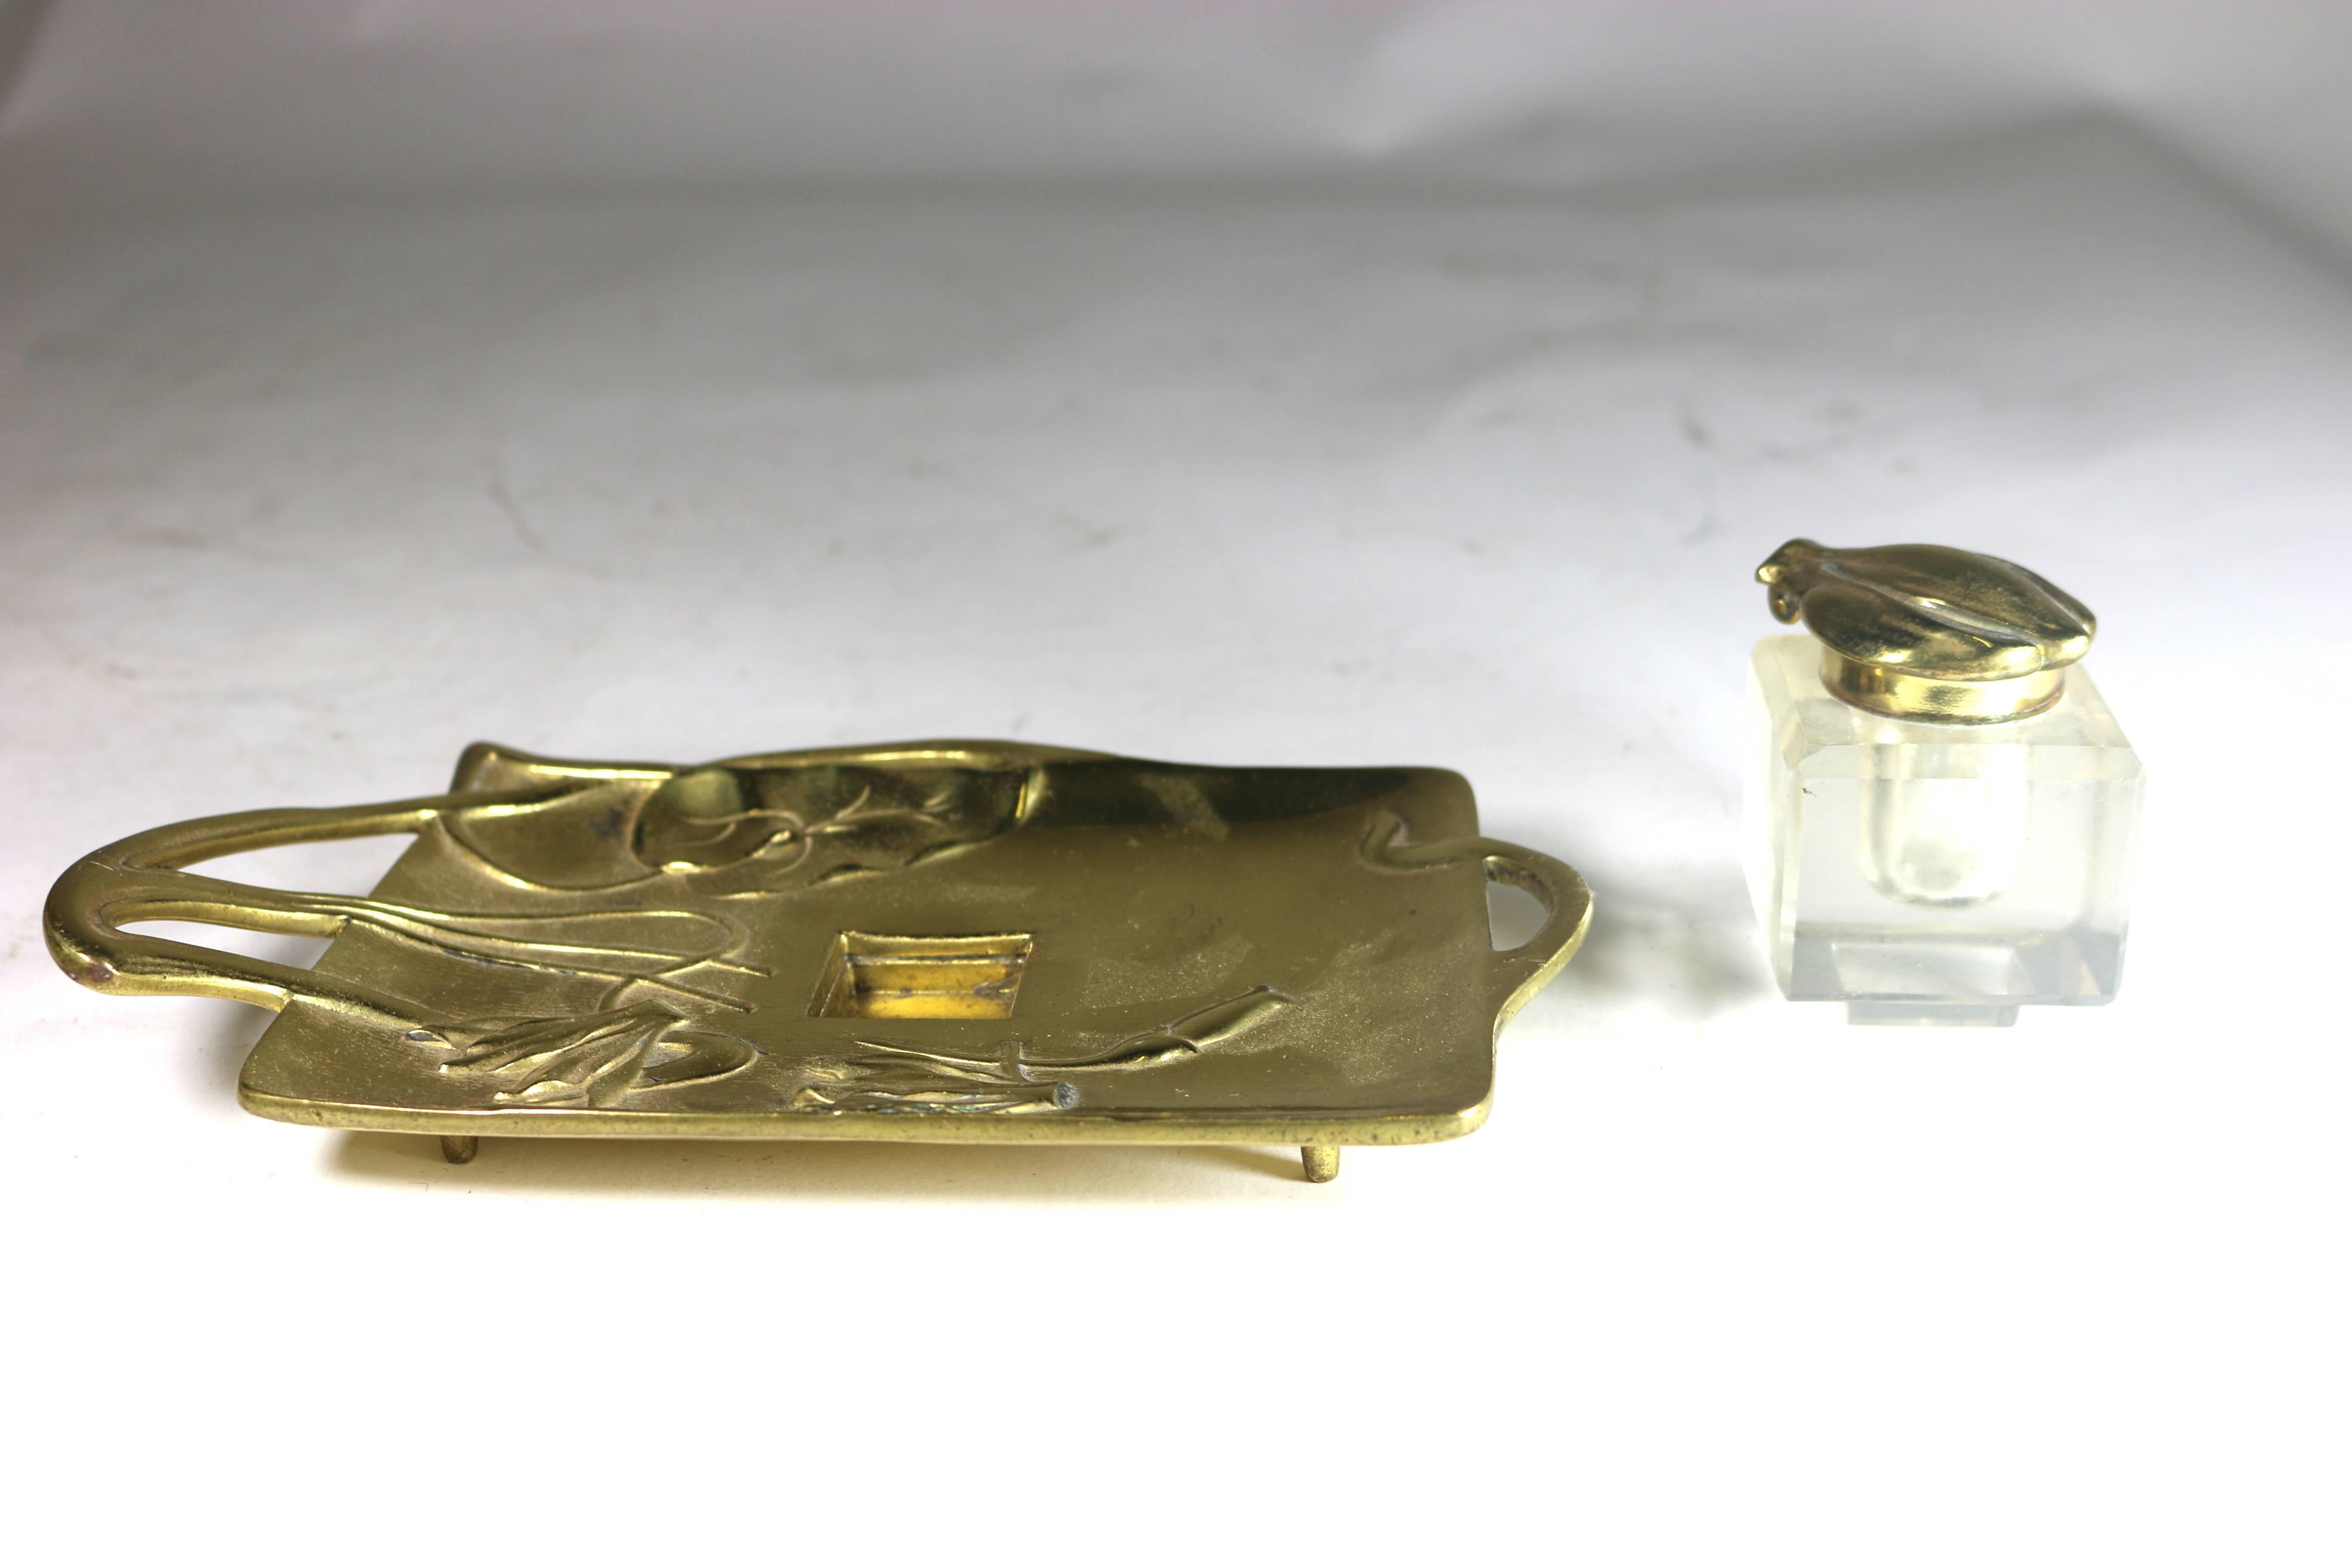 Makes a Great Gift!  Elegant Austrian Art Nouveau brass inkwell with embossed vine and floral curvilinear nouveau design tray with sinewy articulated vine handles and original articulated leaf form inkwell top which opens to a hinged hefty crystal